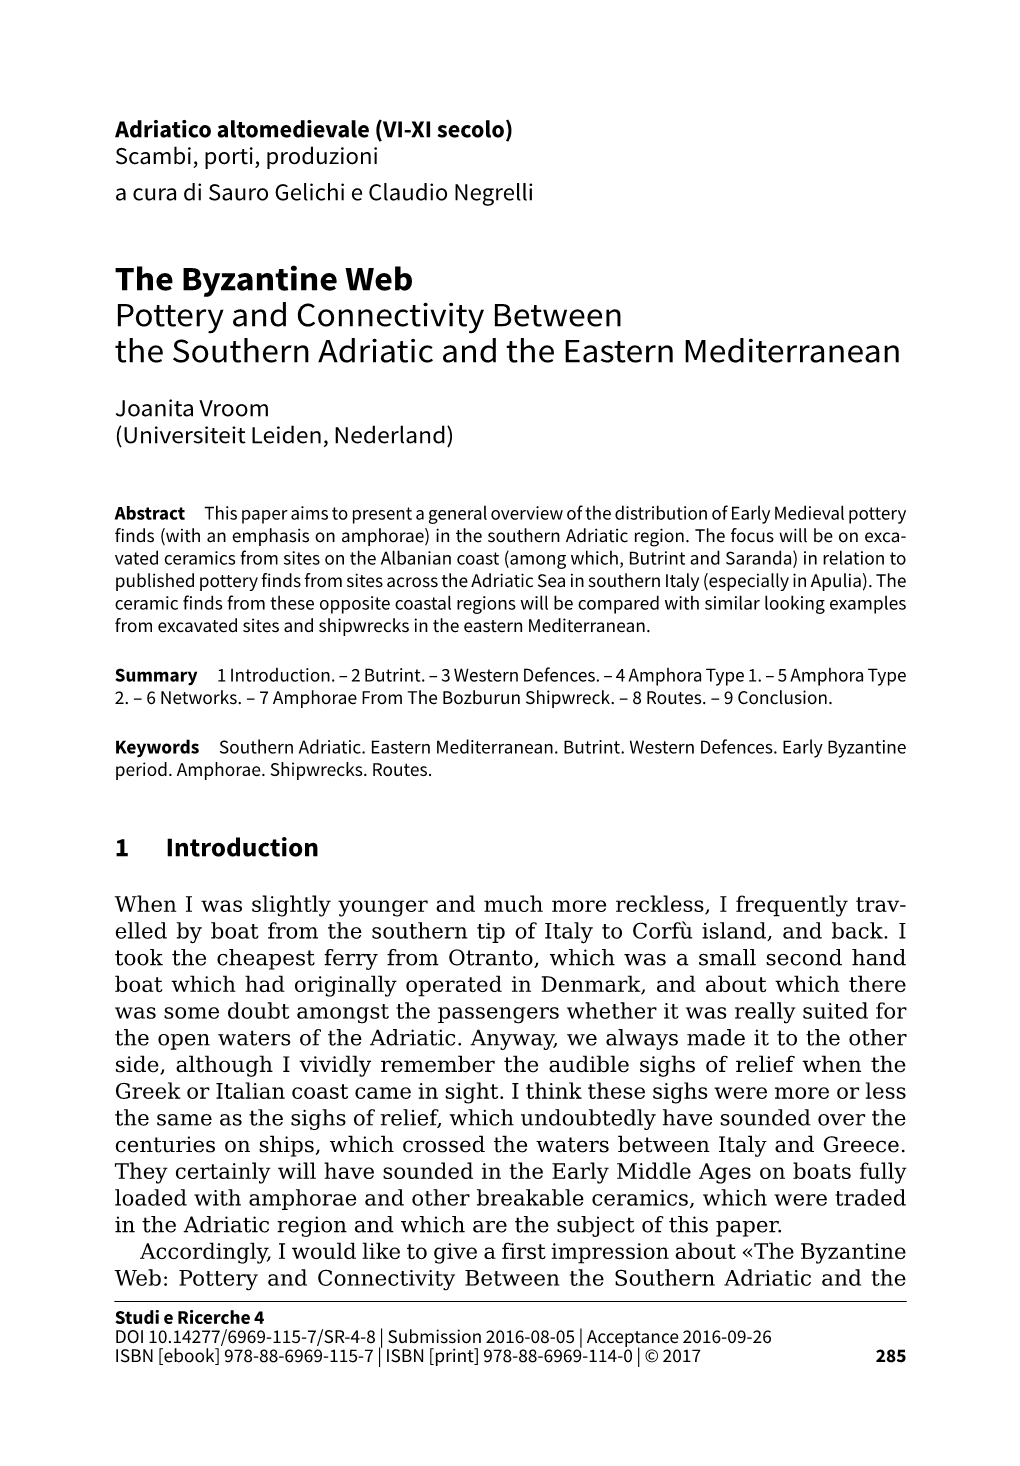 The Byzantine Web Pottery and Connectivity Between the Southern Adriatic and the Eastern Mediterranean